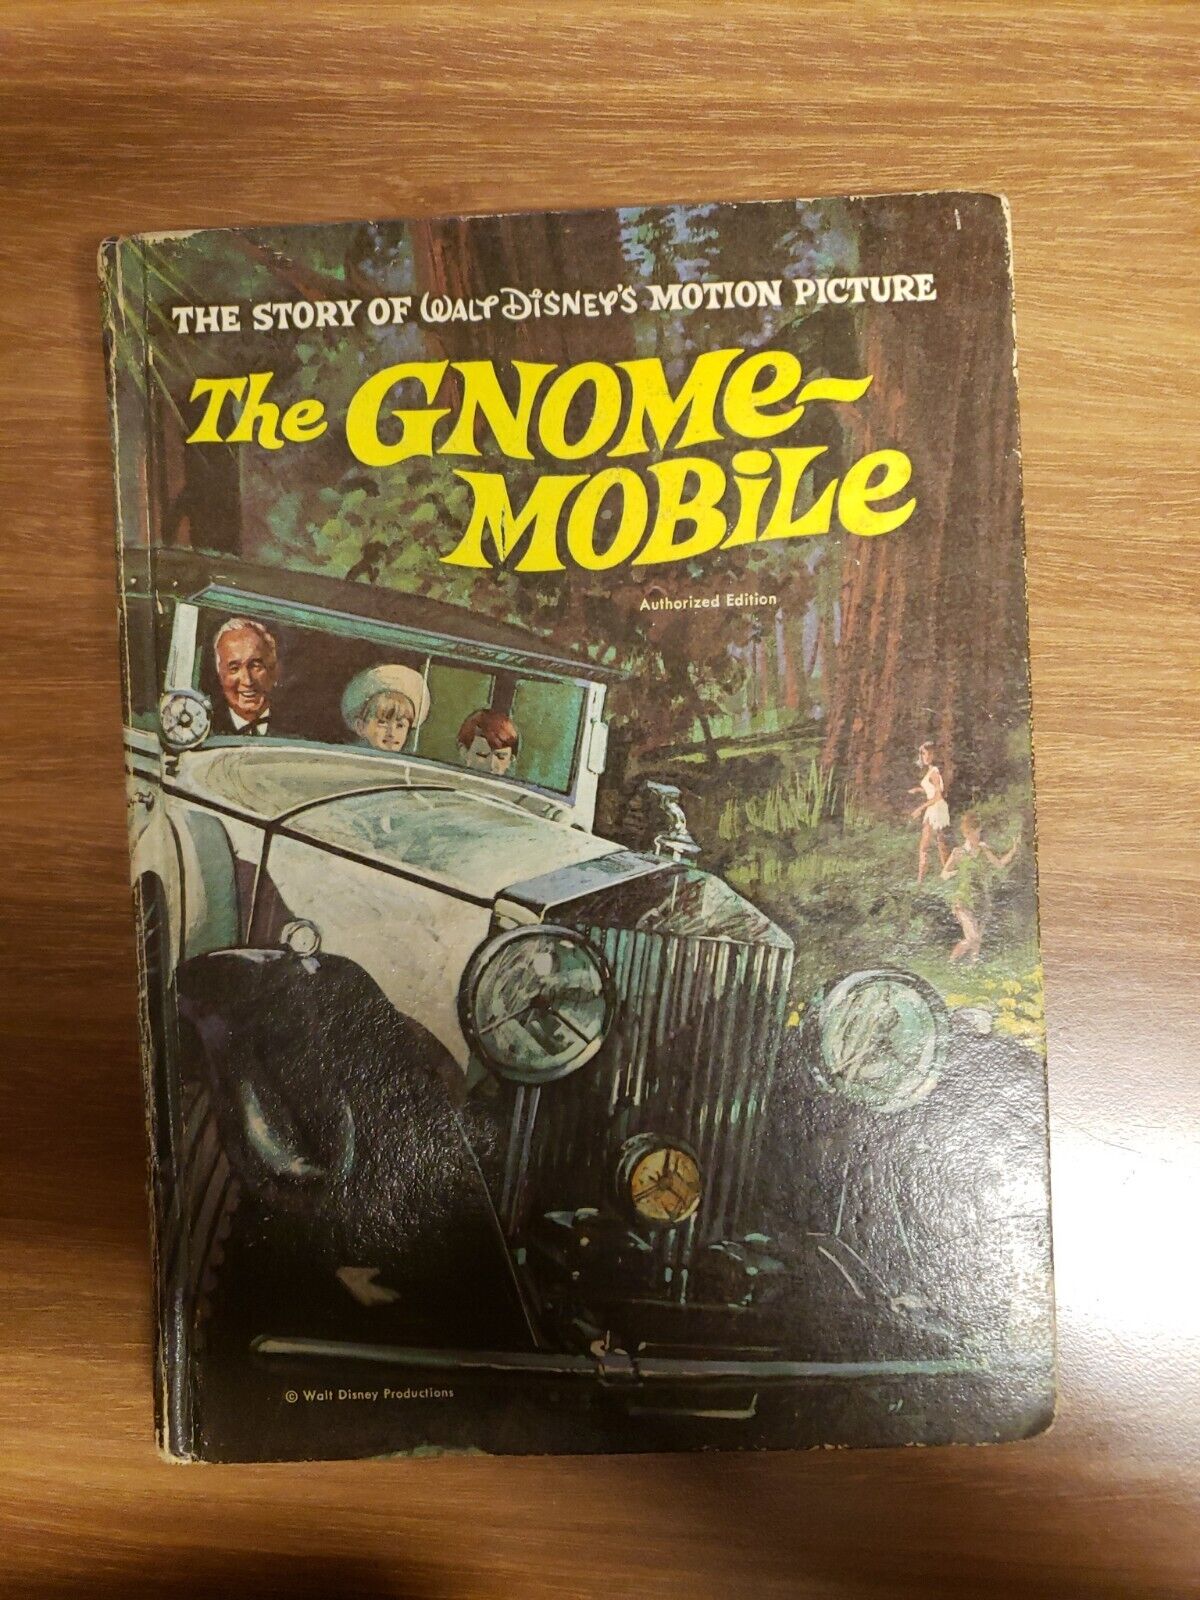 The Gnome - Mobile 1967 Walt Disney Authorized Edition Hardcover Book